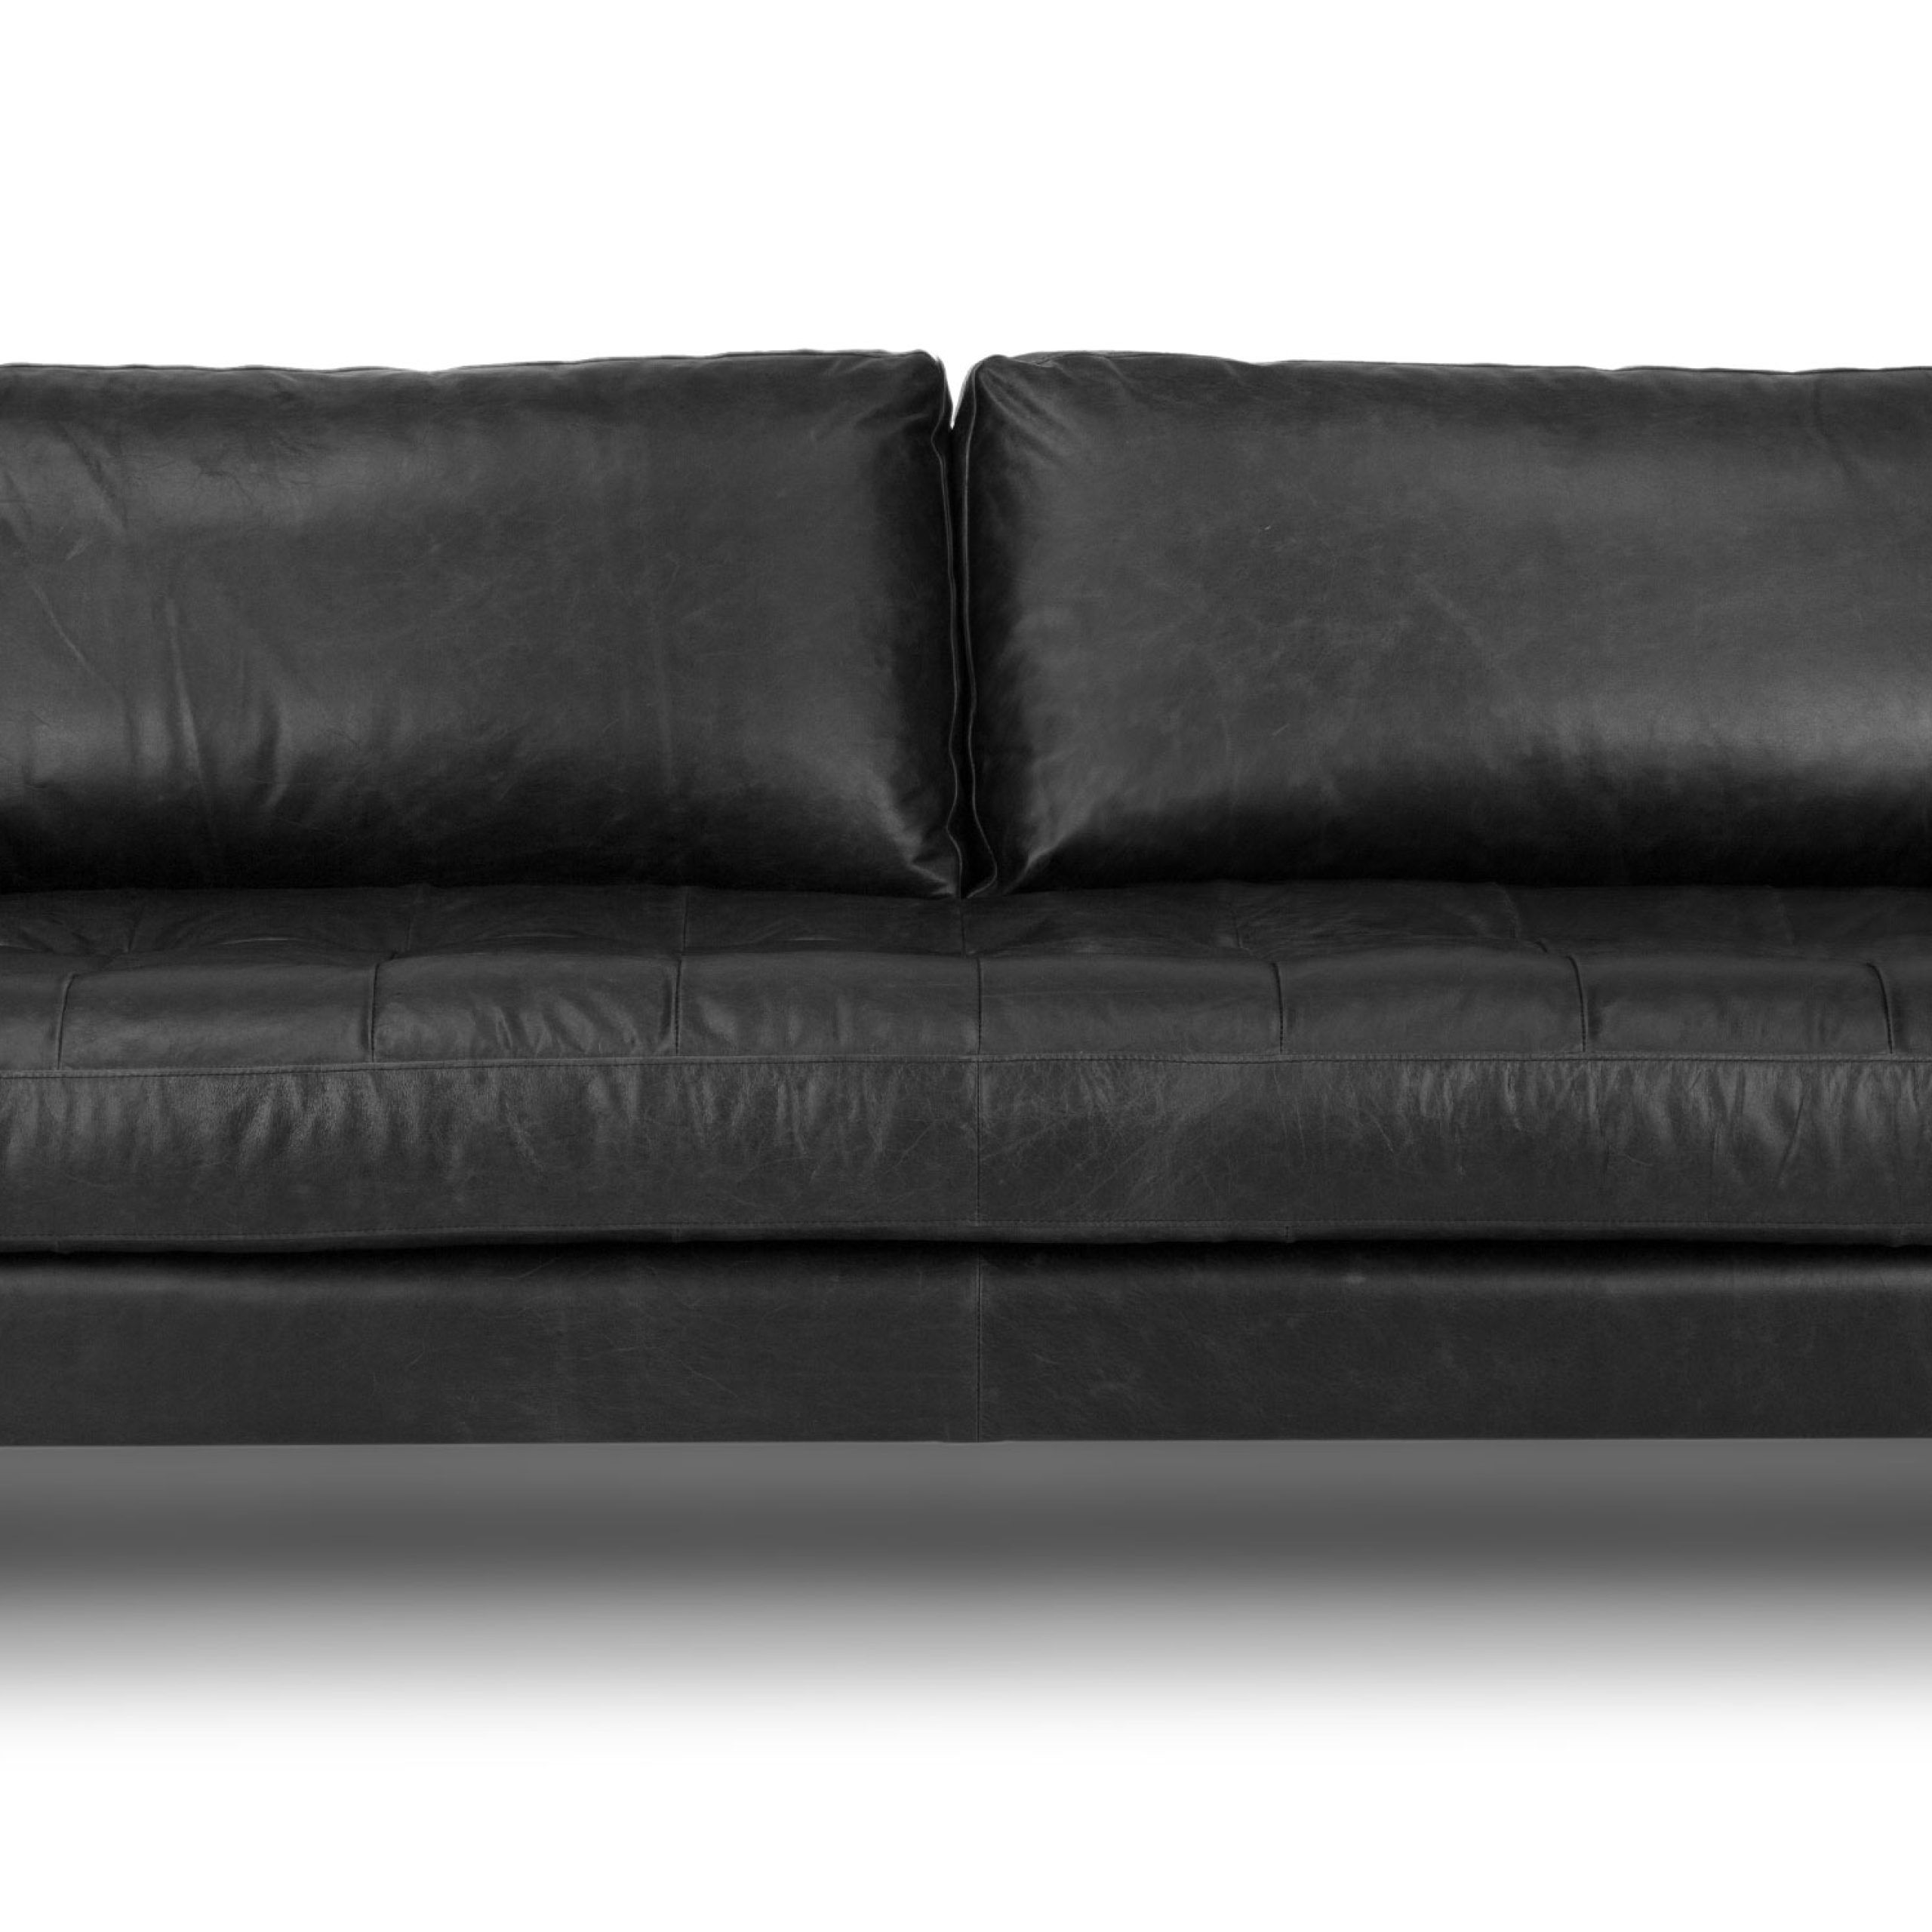 Sven Walnut & Oxford Black Leather 3 Seater Sofa | Article Intended For Sofas In Black (View 15 of 15)